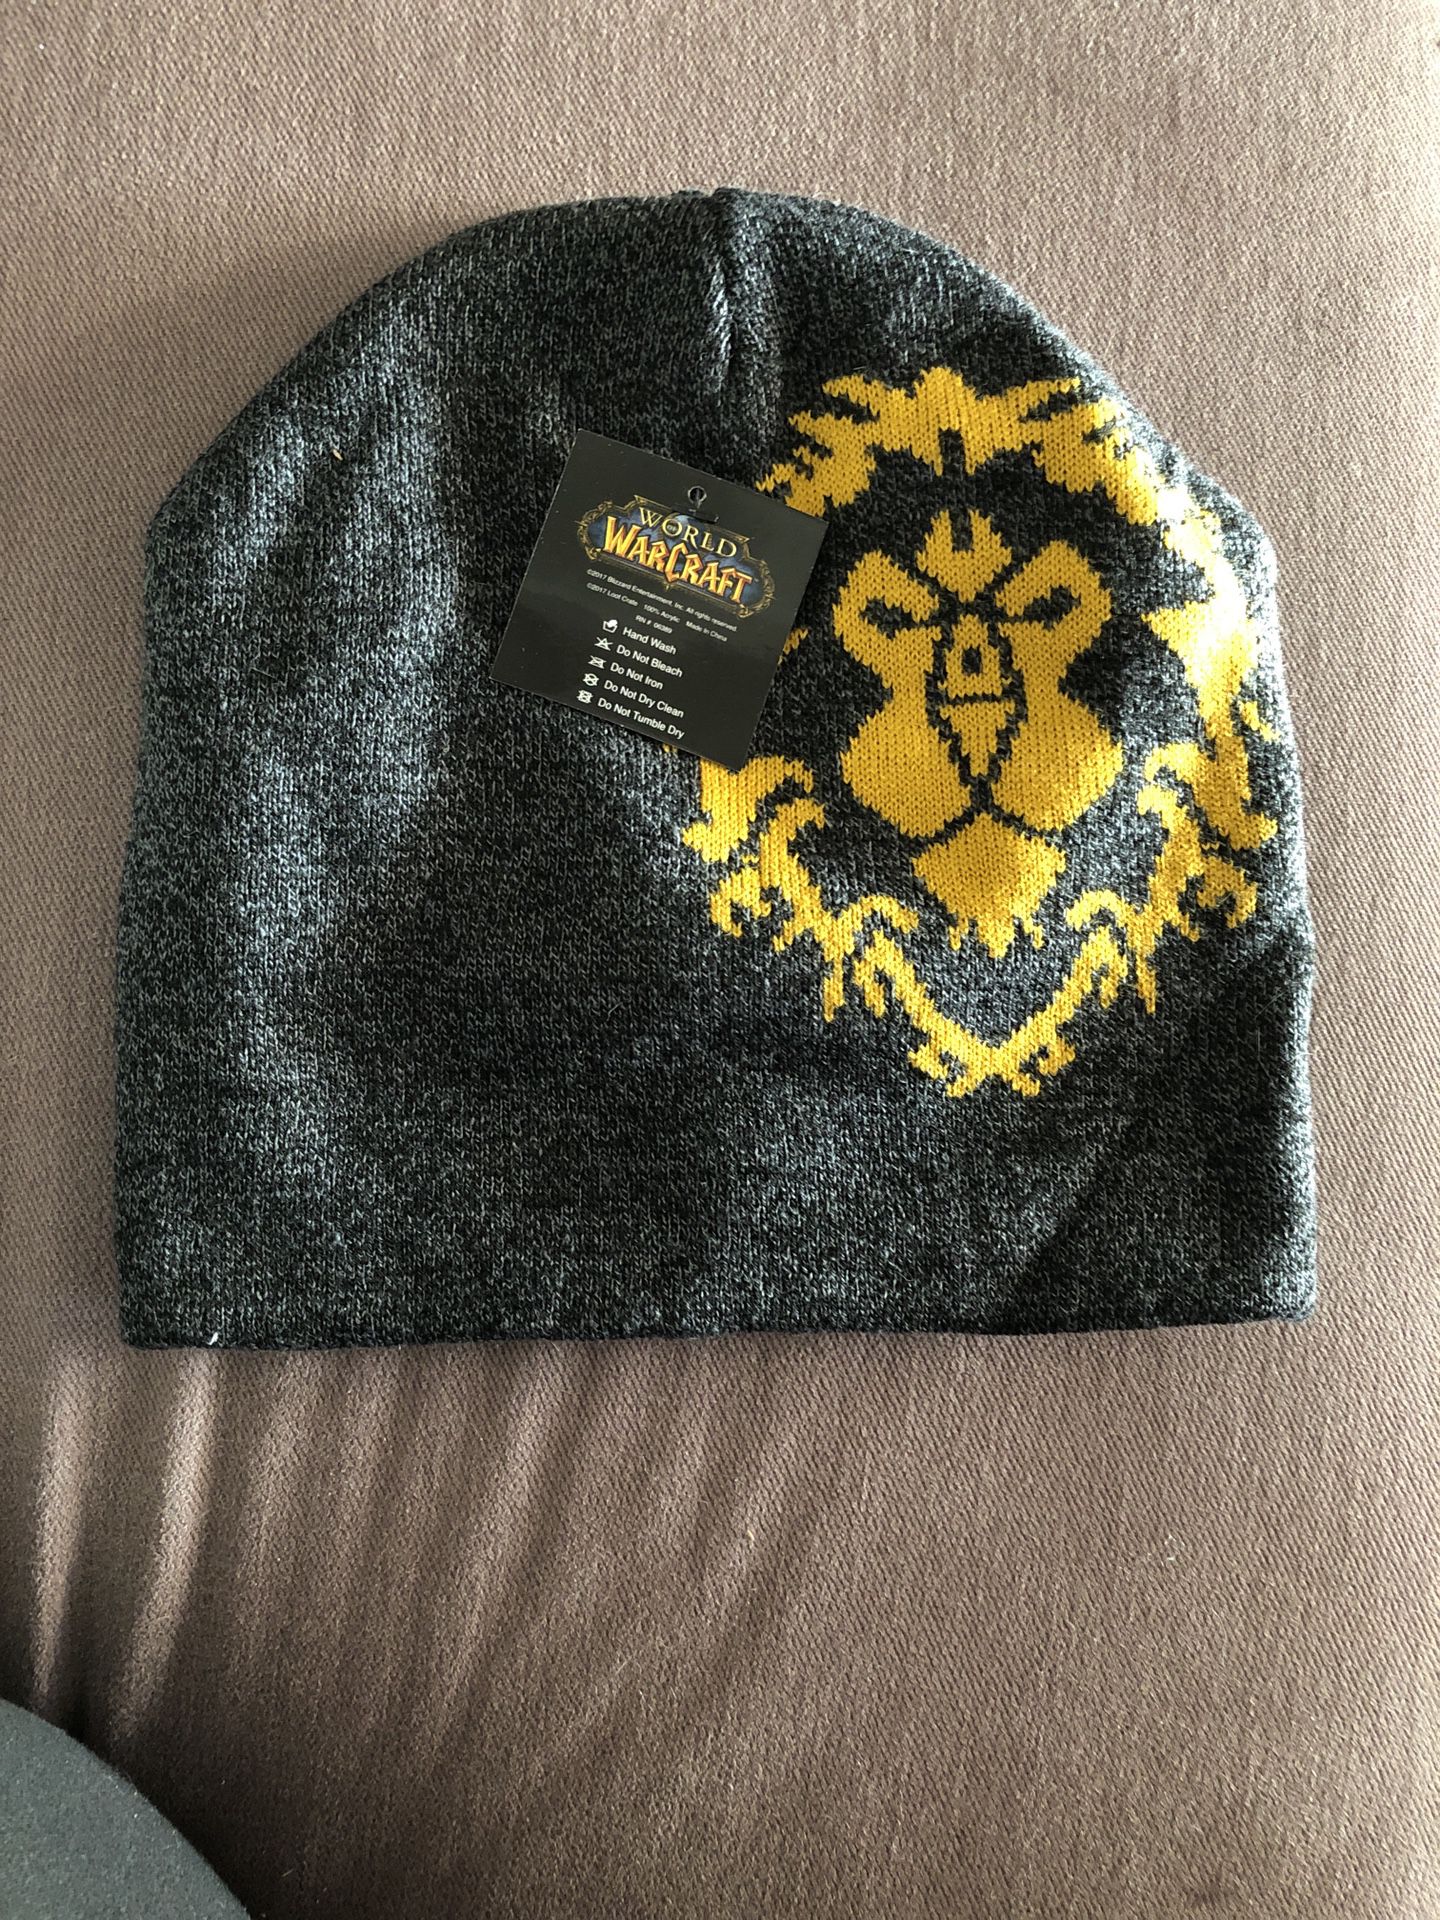 Exclusive Loot Crate World Of Warcraft Reversible Beanie